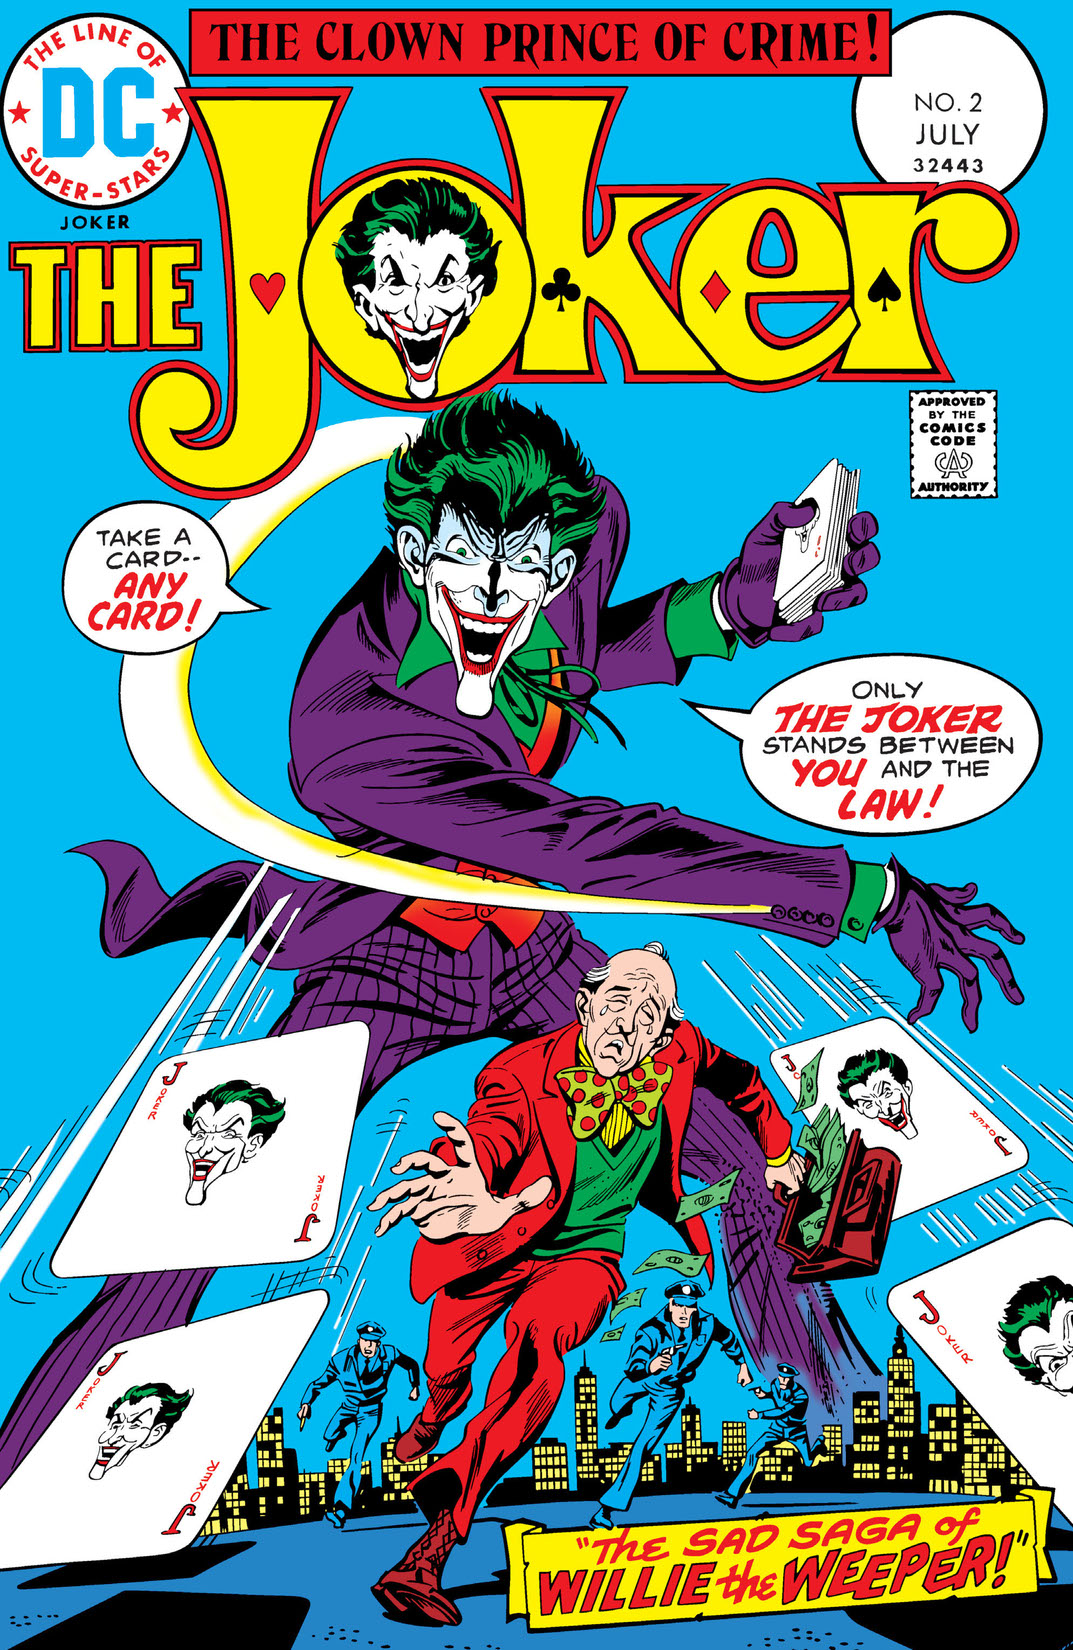 The Joker (1975-) #2 preview images